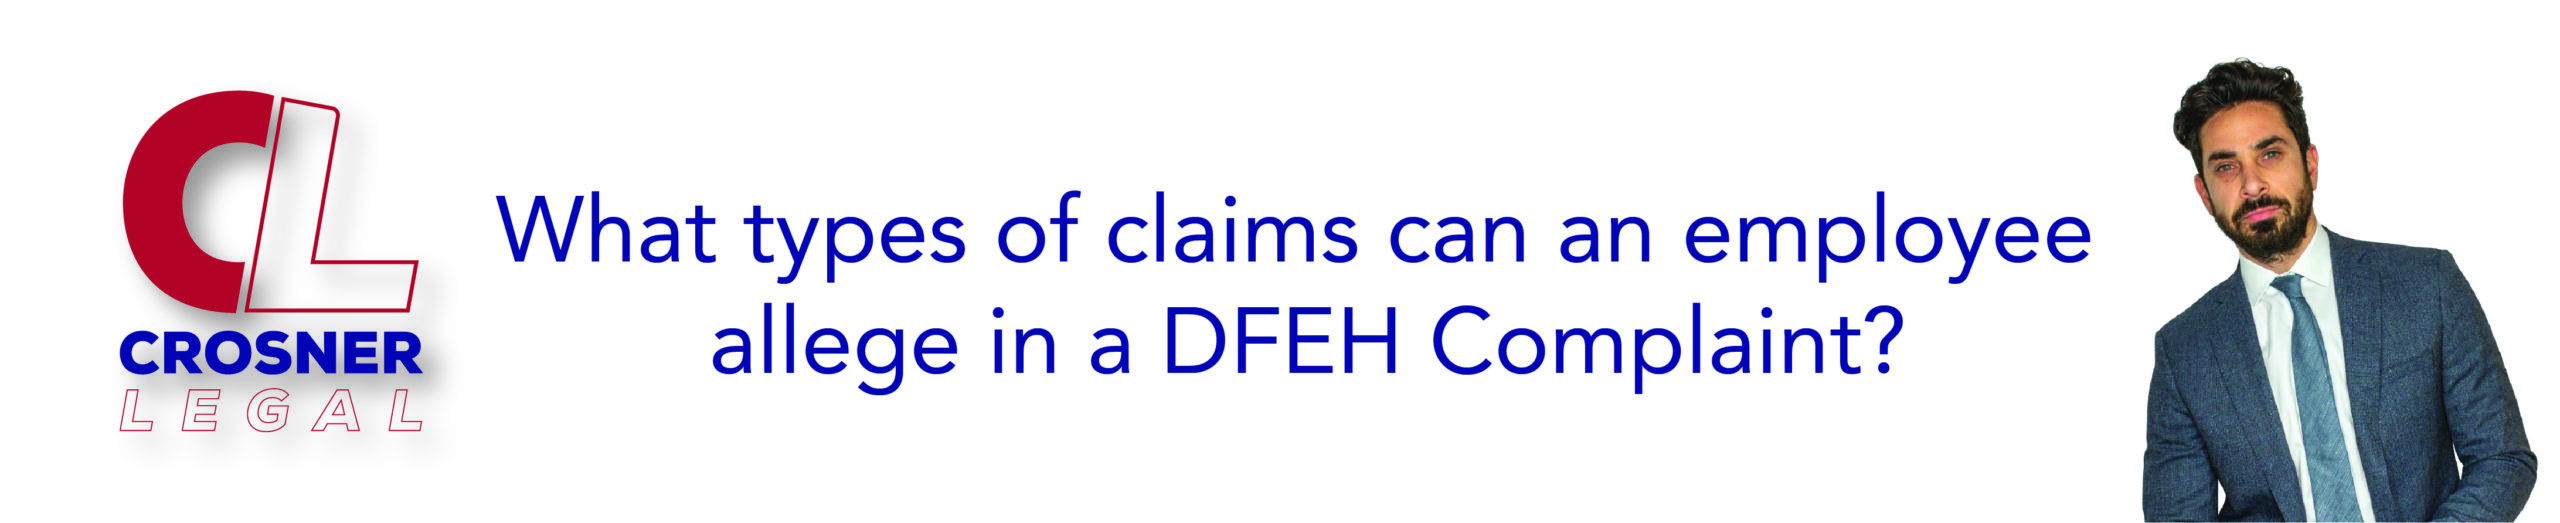 What types of claims can an employee allege in a DFEH Complaint?